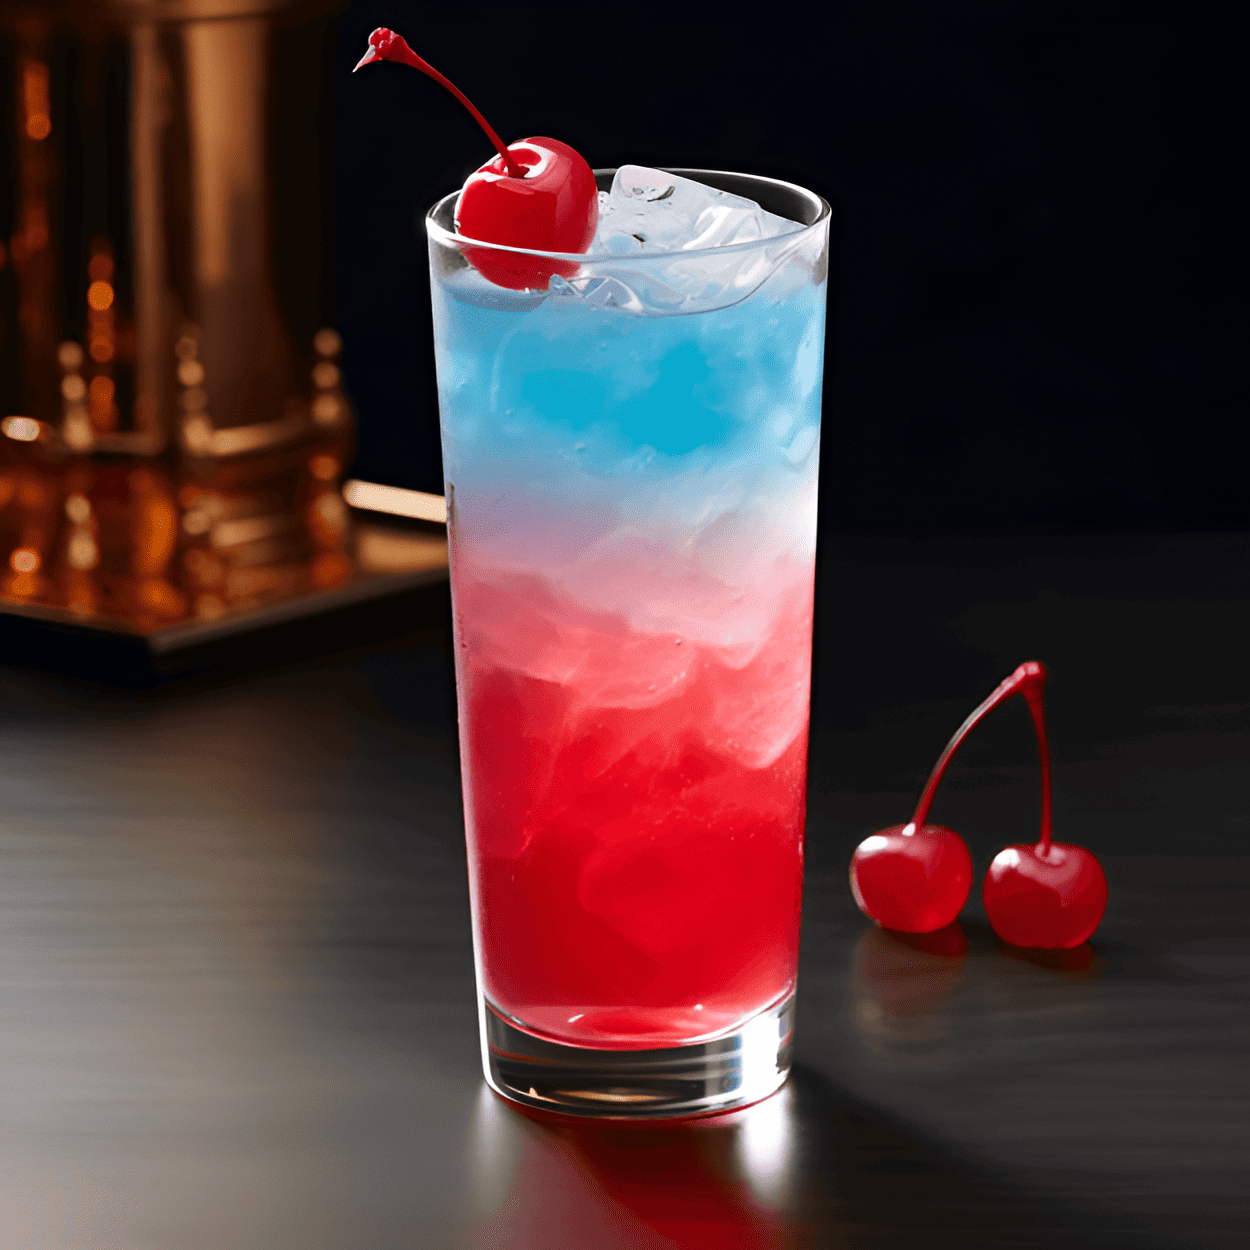 Spiderman Cocktail Recipe - The Spiderman Cocktail is a sweet, fruity, and refreshing drink. It has a strong berry flavor, with a hint of citrus from the lemon juice. The vodka gives it a bit of a kick, but it's not too overpowering.